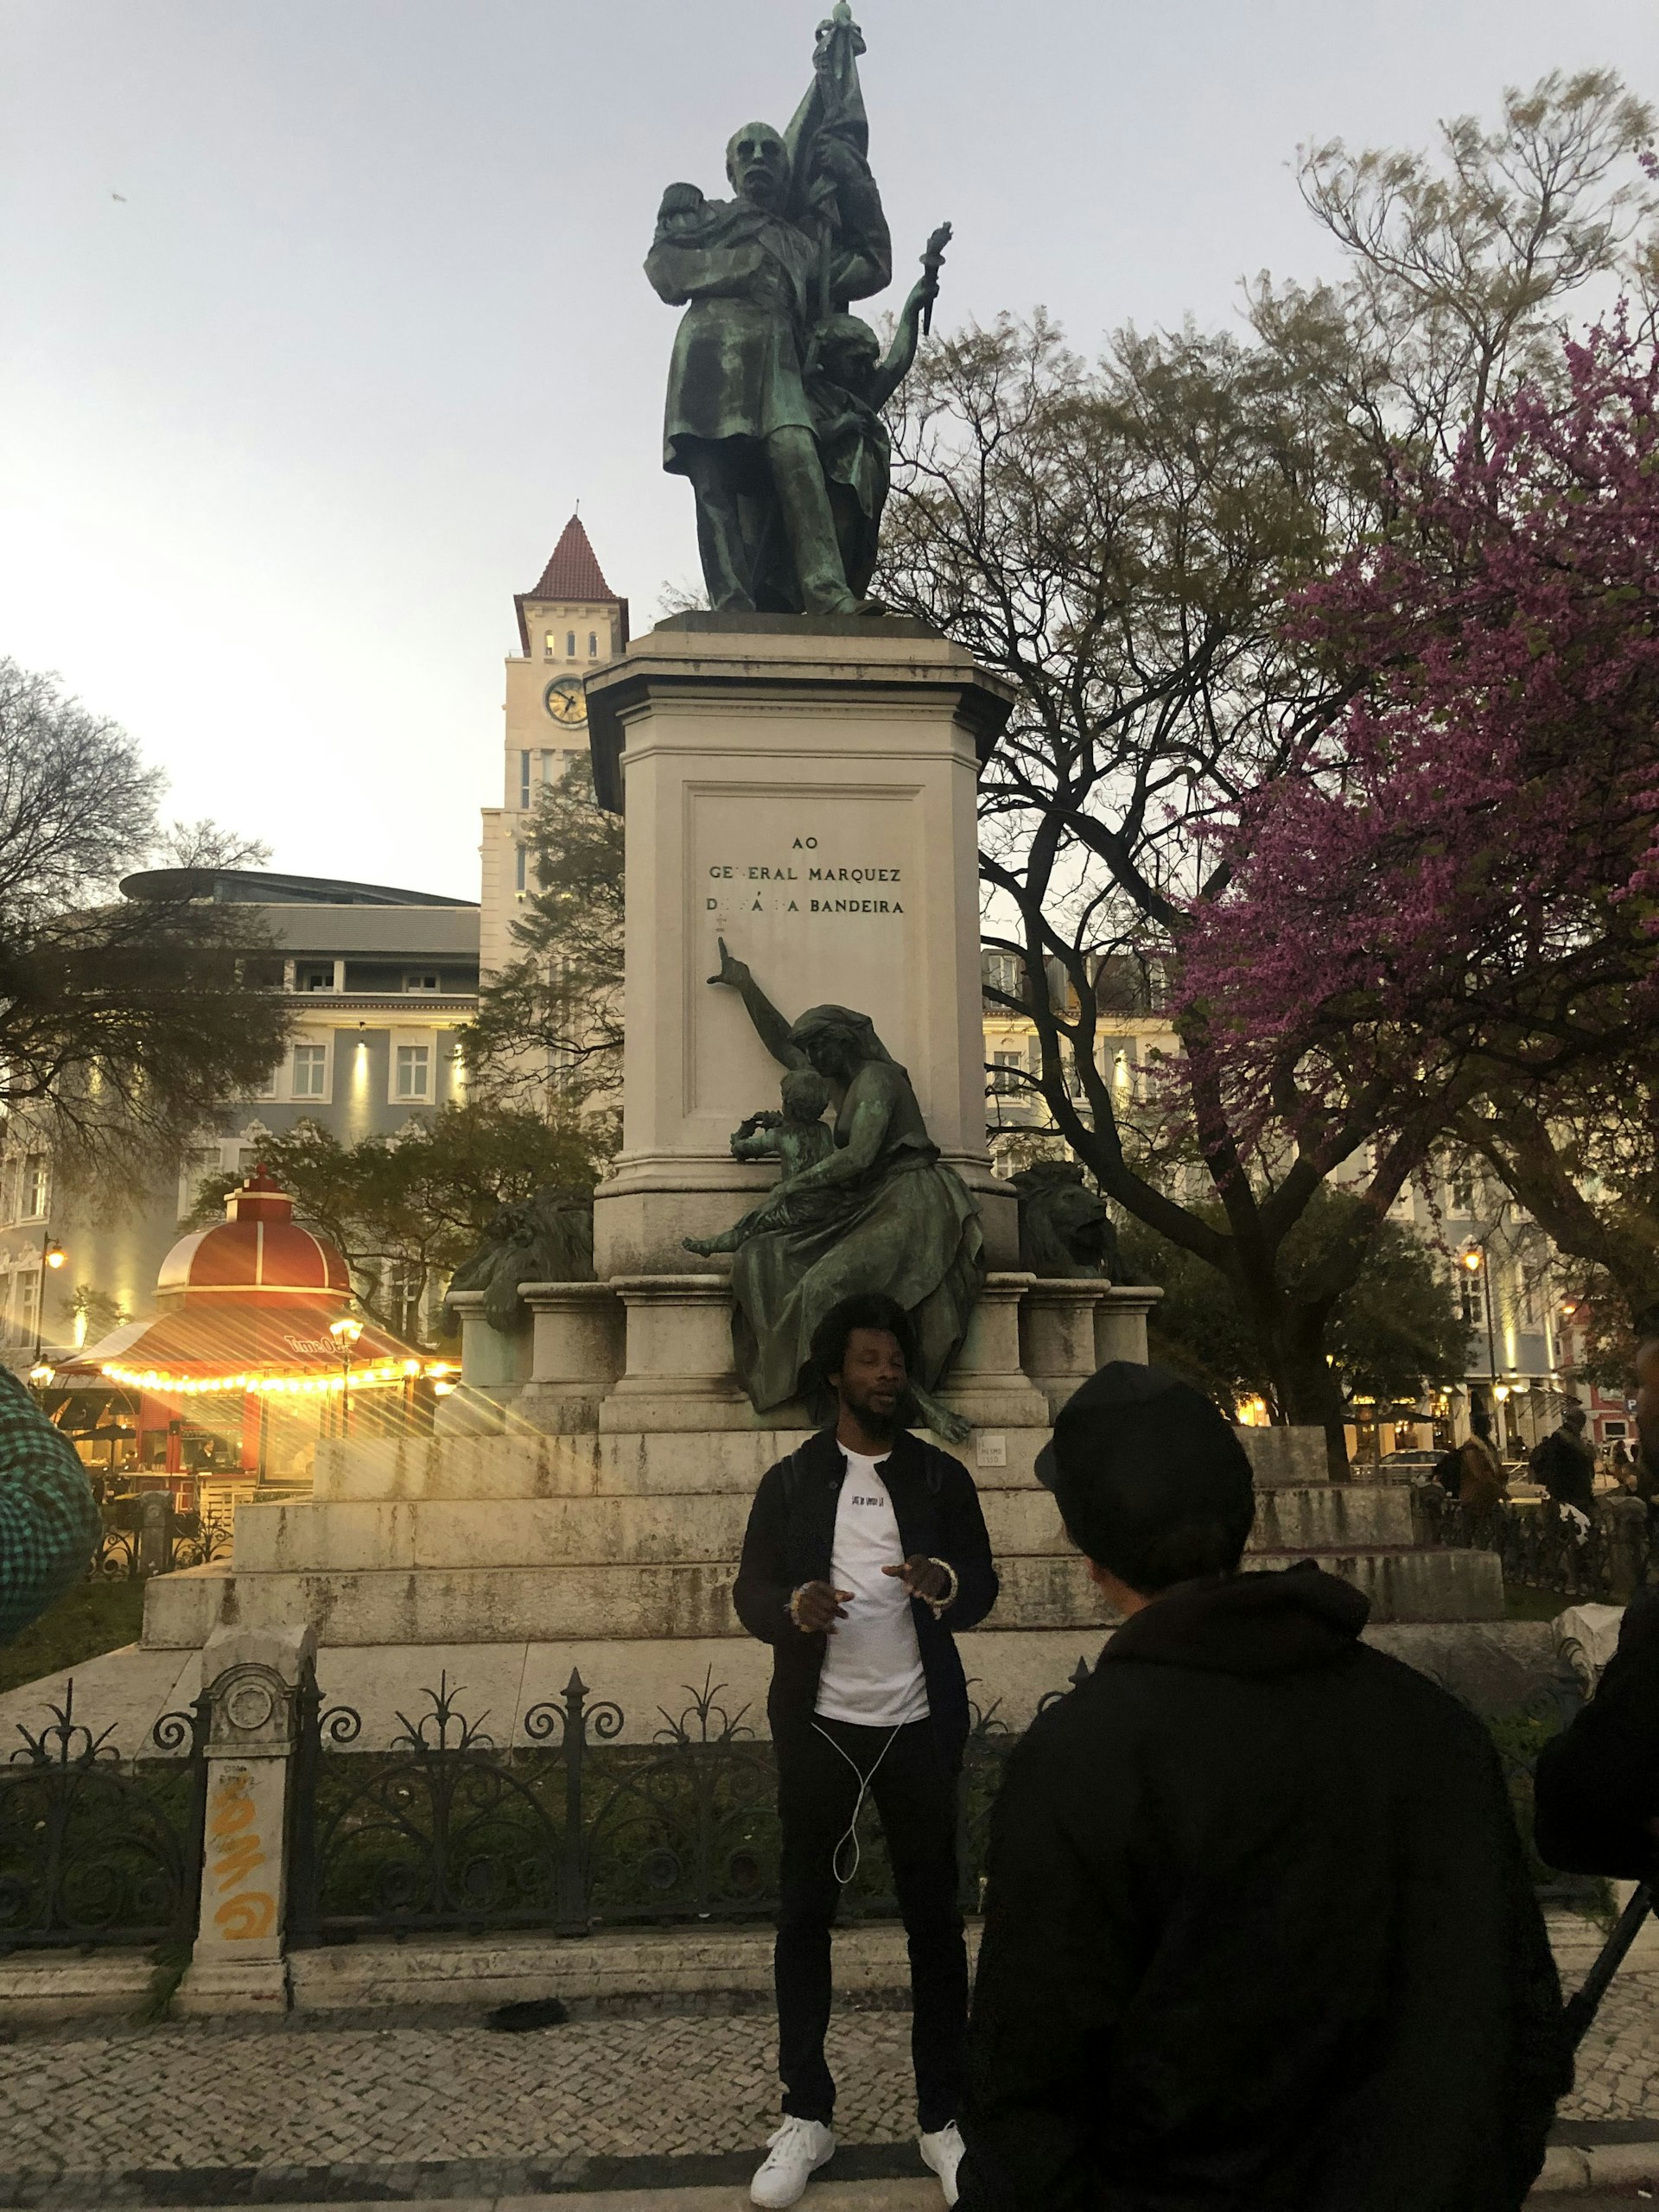 African Lisbon tour explores colonialism and history of slavery